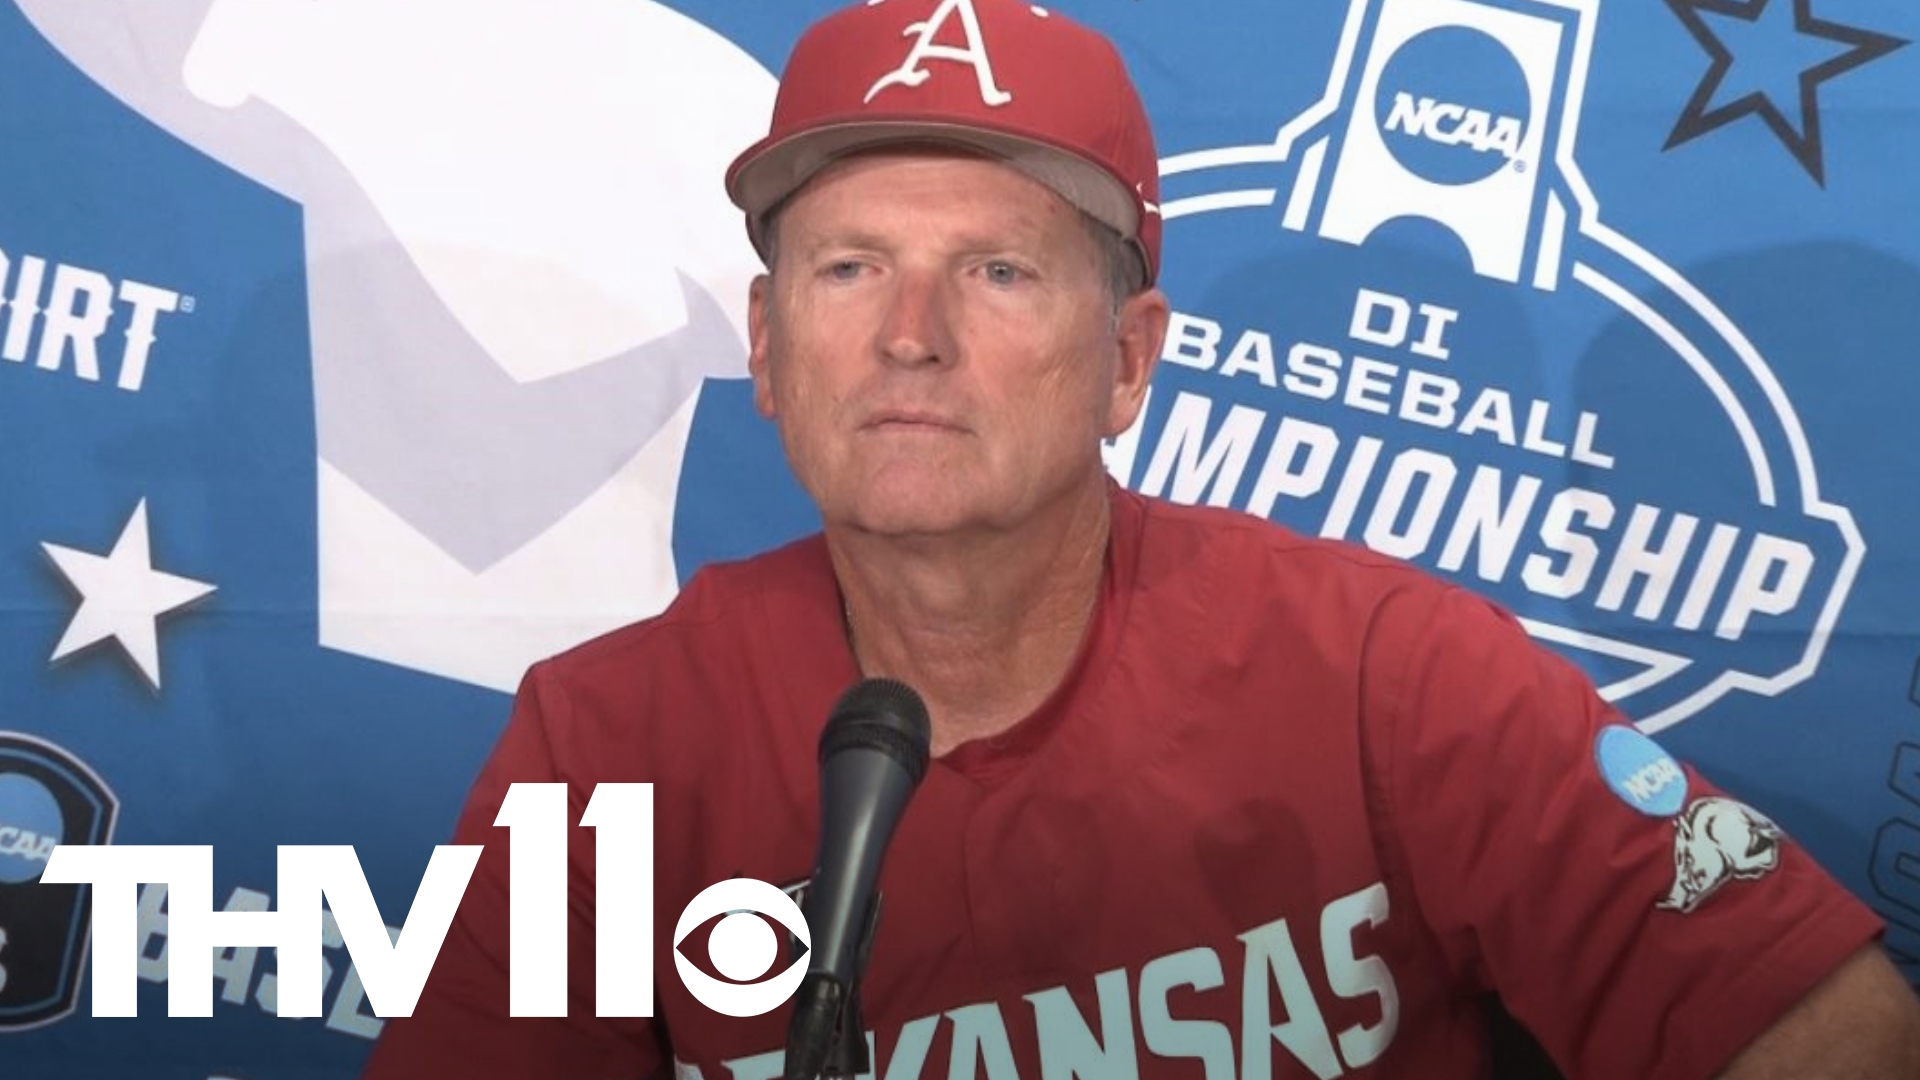 The Arkansas head coach meets with the media after the season-ending loss to SEMO